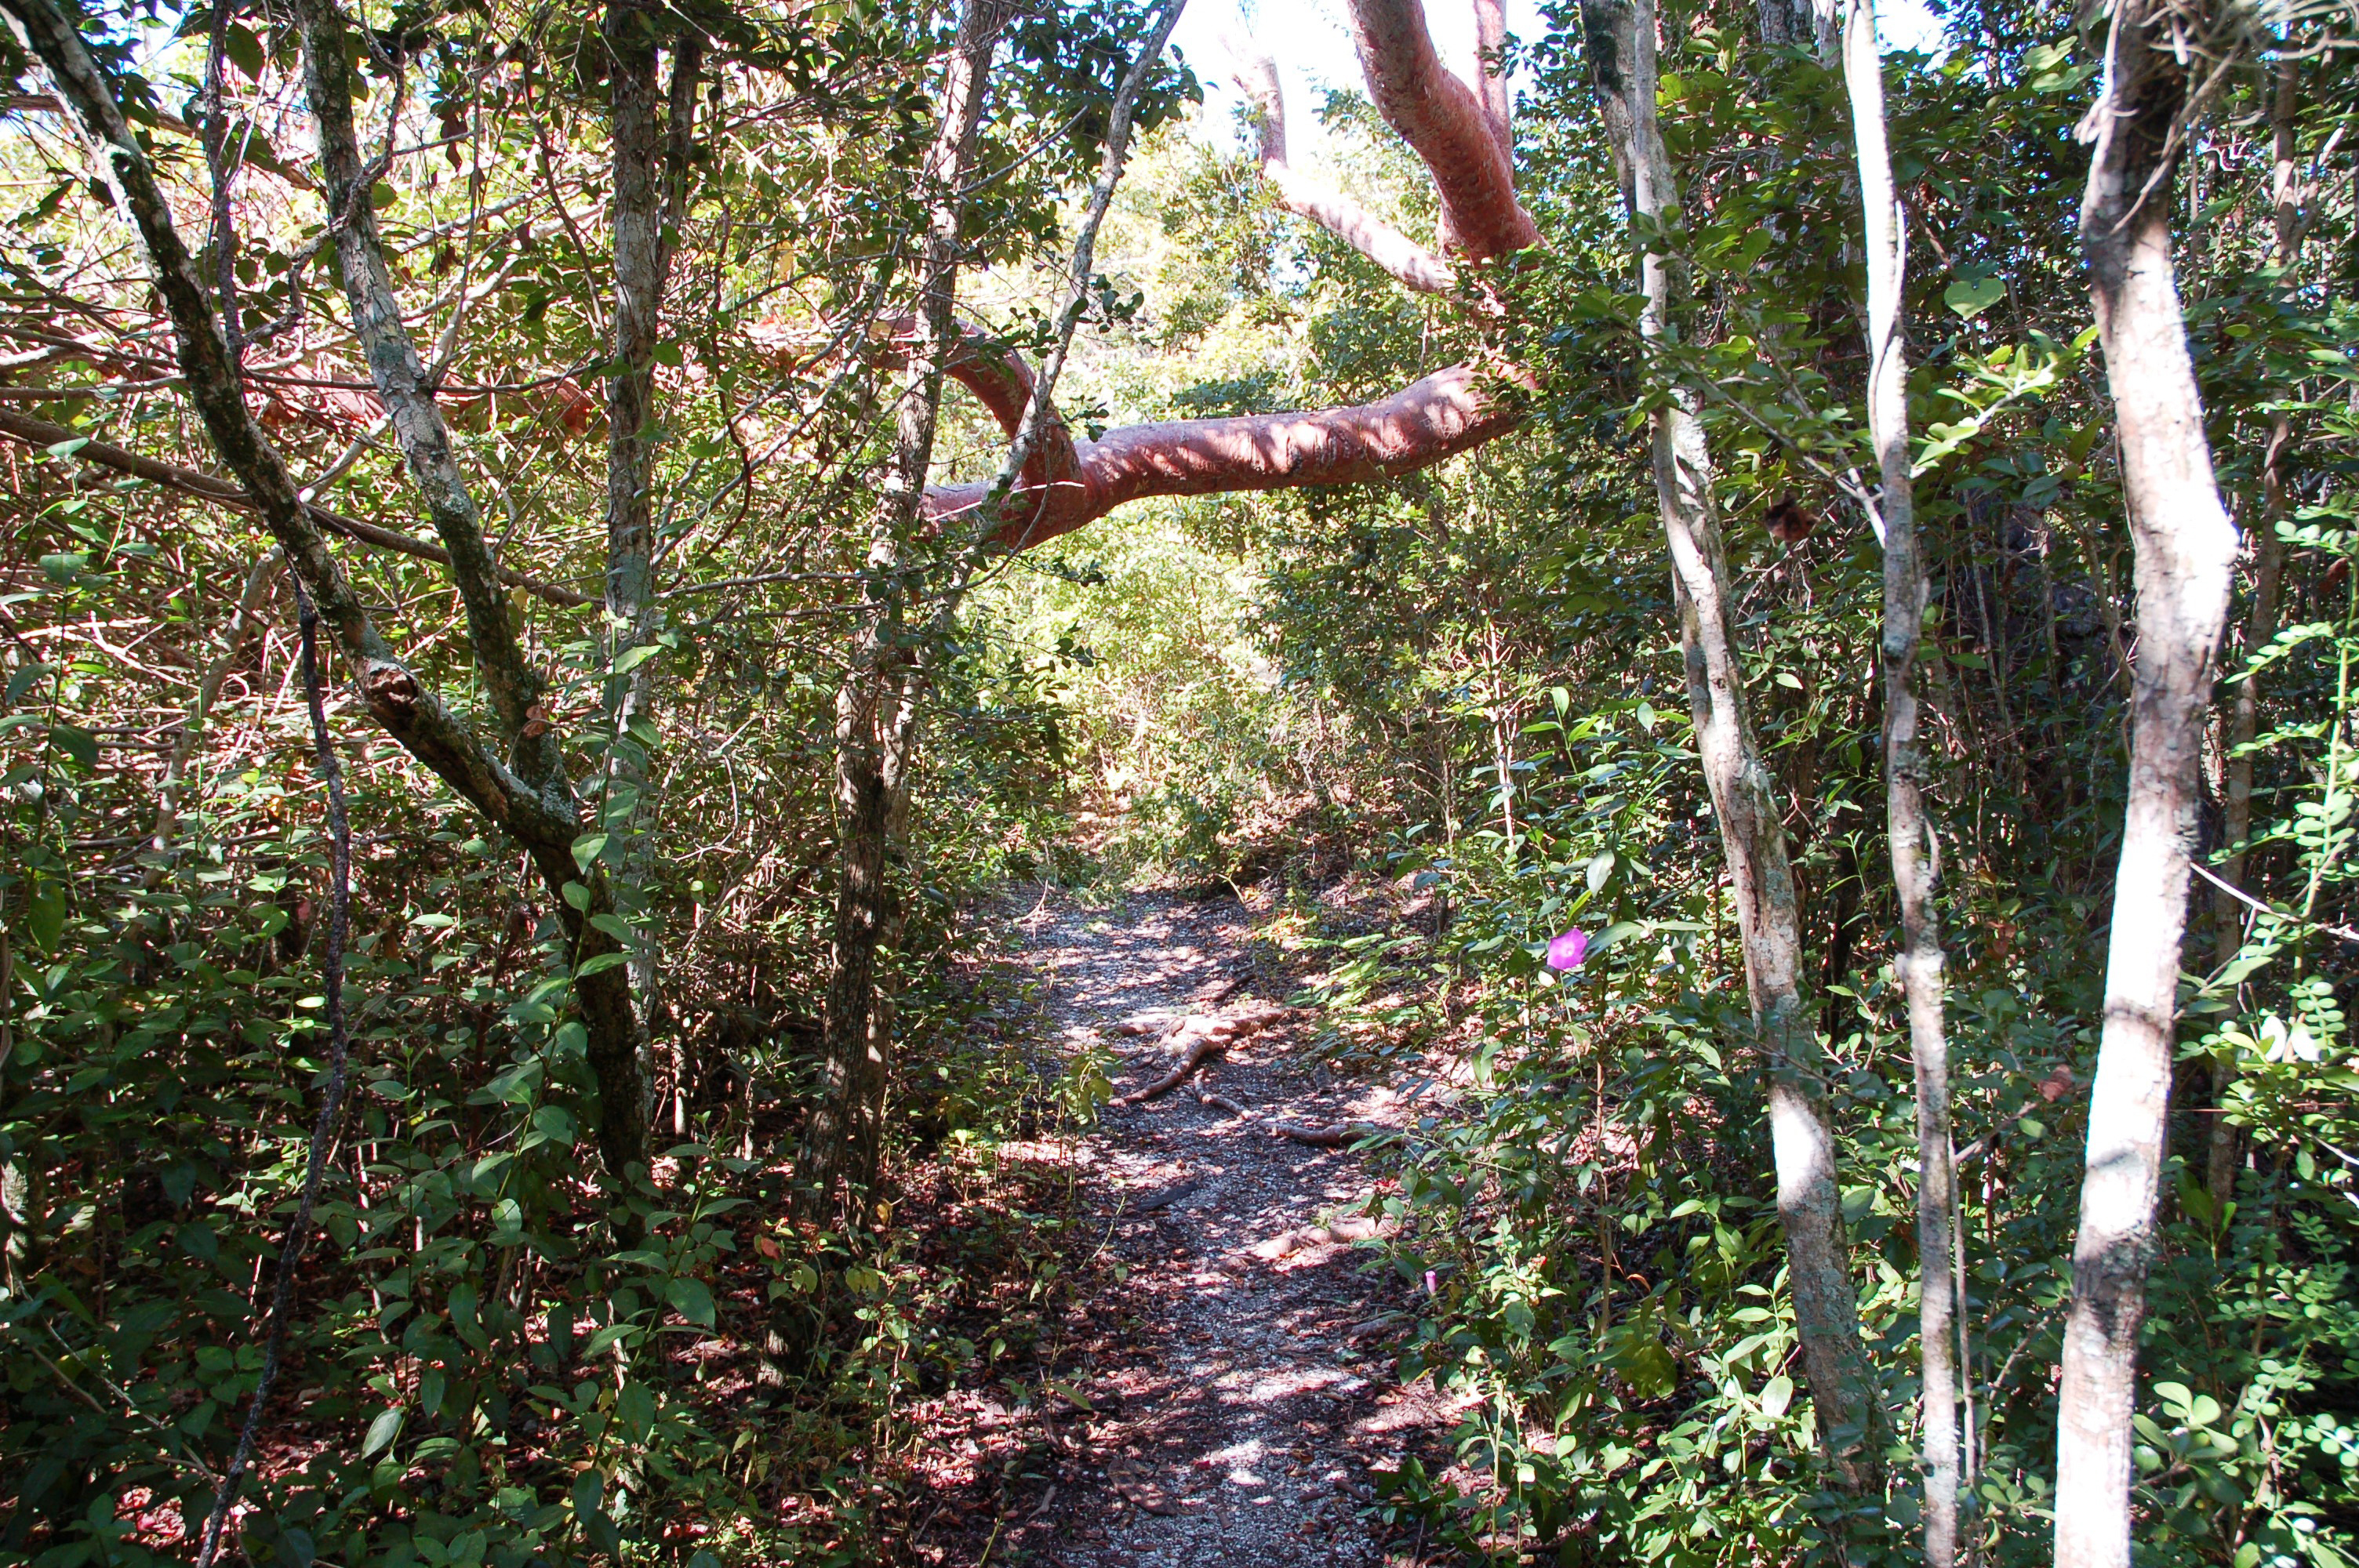 A view of the trail at Mound Key.